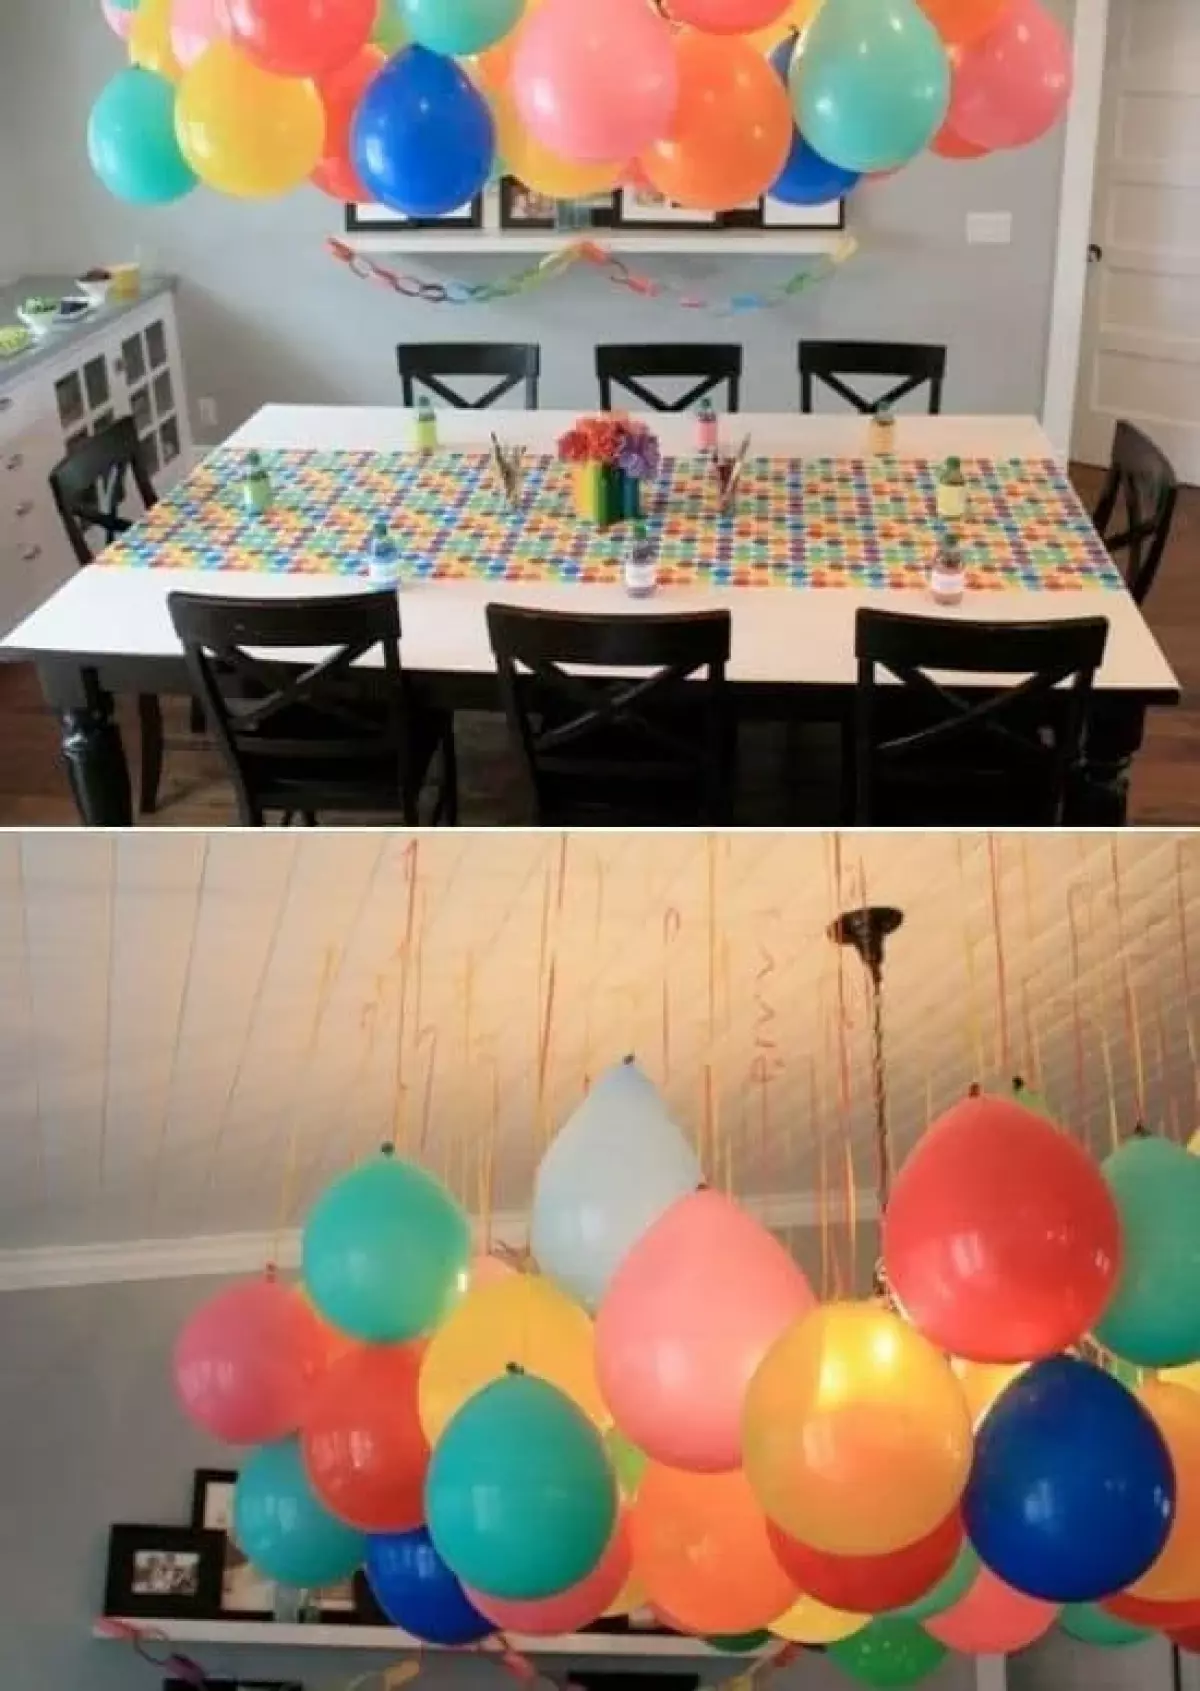 Colorful Balloon Clouds over the Dining Table